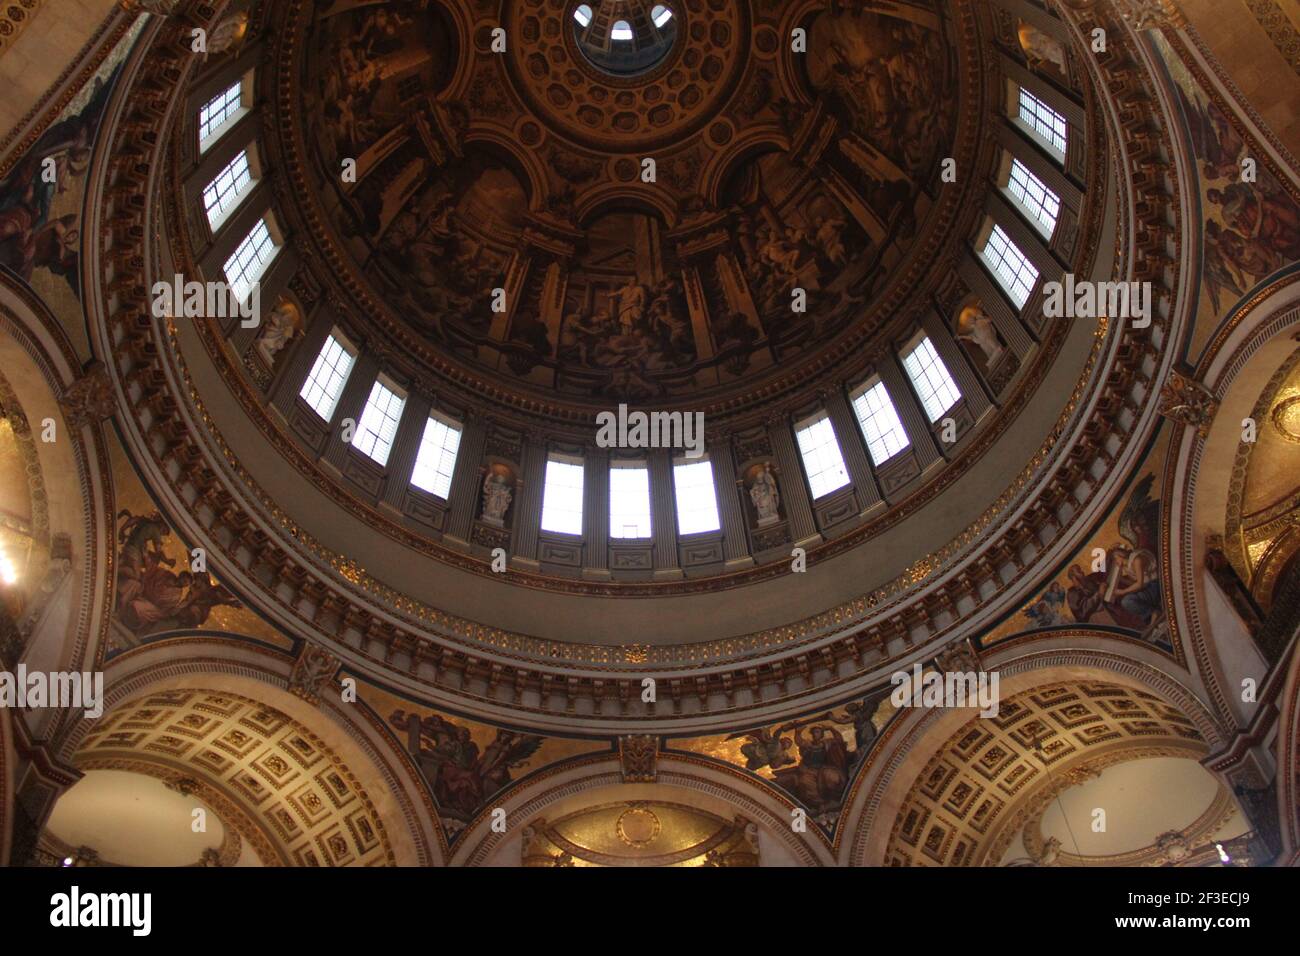 The dome interior in St Paul's Cathedral in London, UK Stock Photo